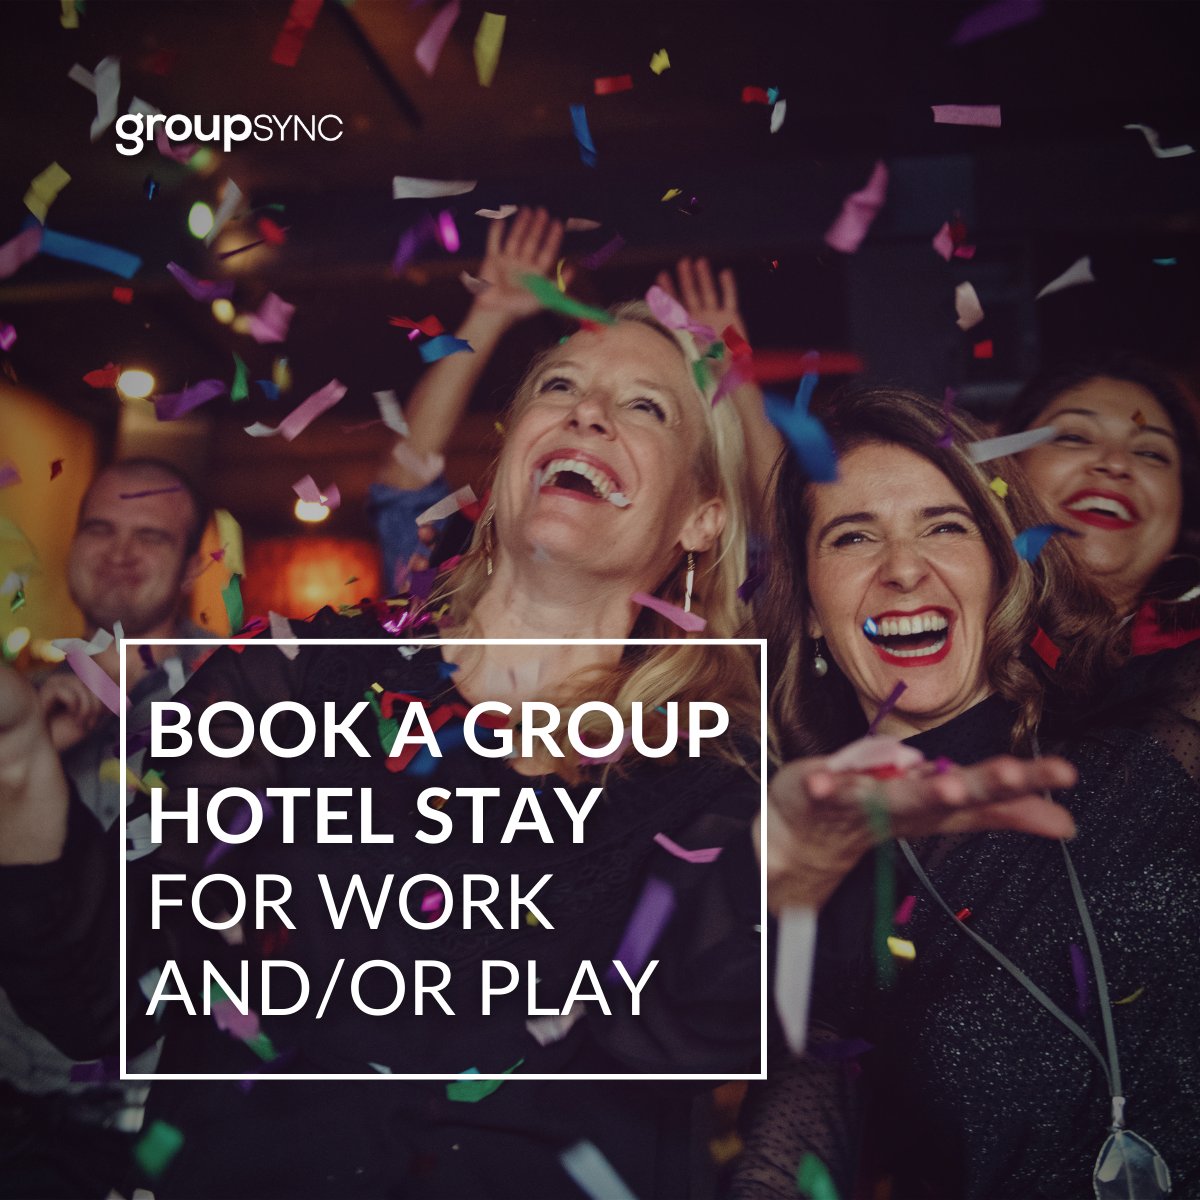 We’re in the business of group travel...but not all group travel is purely business.
Whether it’s for celebrations, family, or work—booking your hotel with GroupSync is the merriest way to go. 🥂 🎉
#groupsync #eventprofs #eventprofessionals #travel #hotelbooking #rfp #events